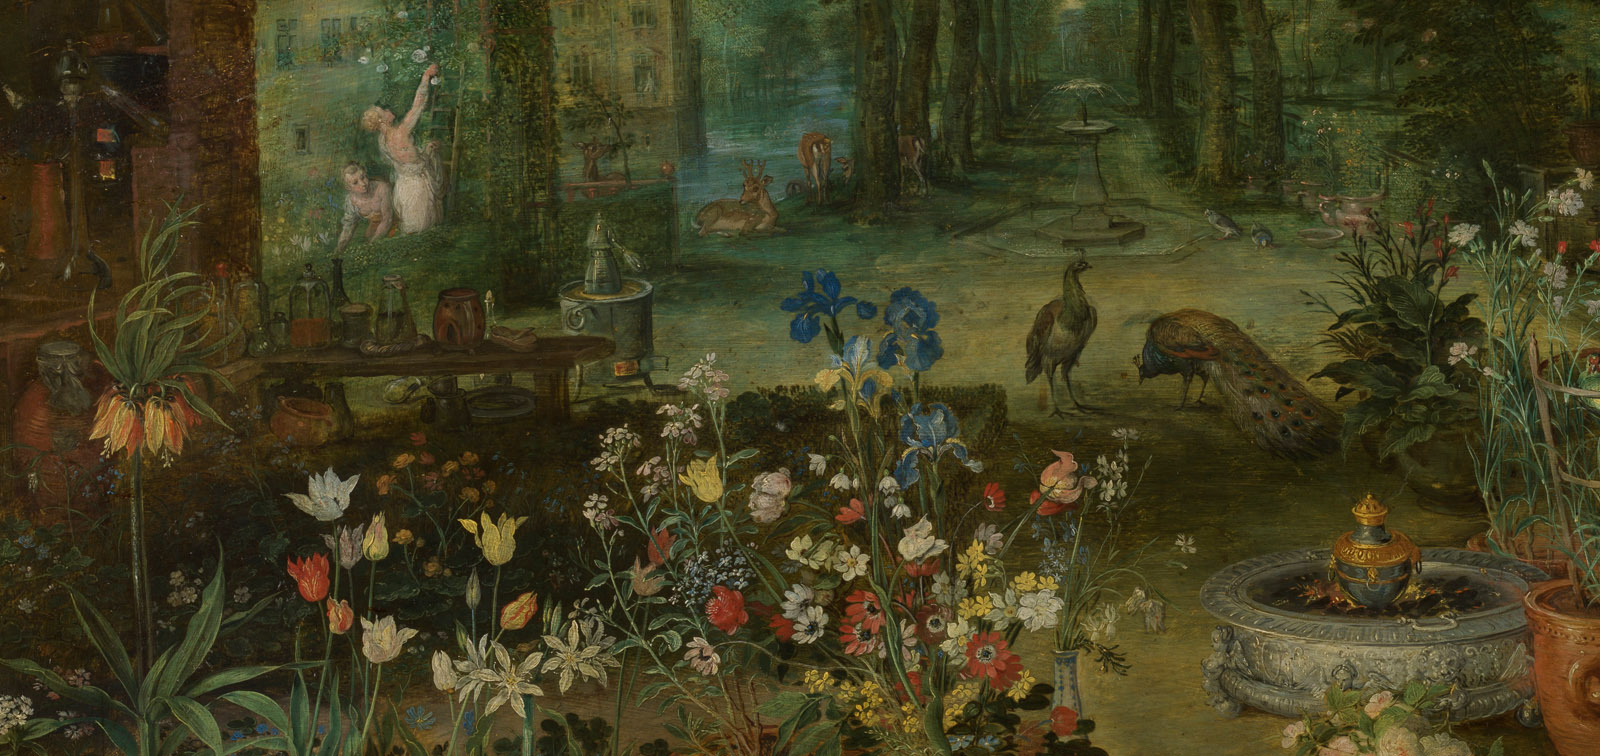 The Essence of a Painting. An Olfactory Exhibition - Exhibition - Museo Nacional del Prado